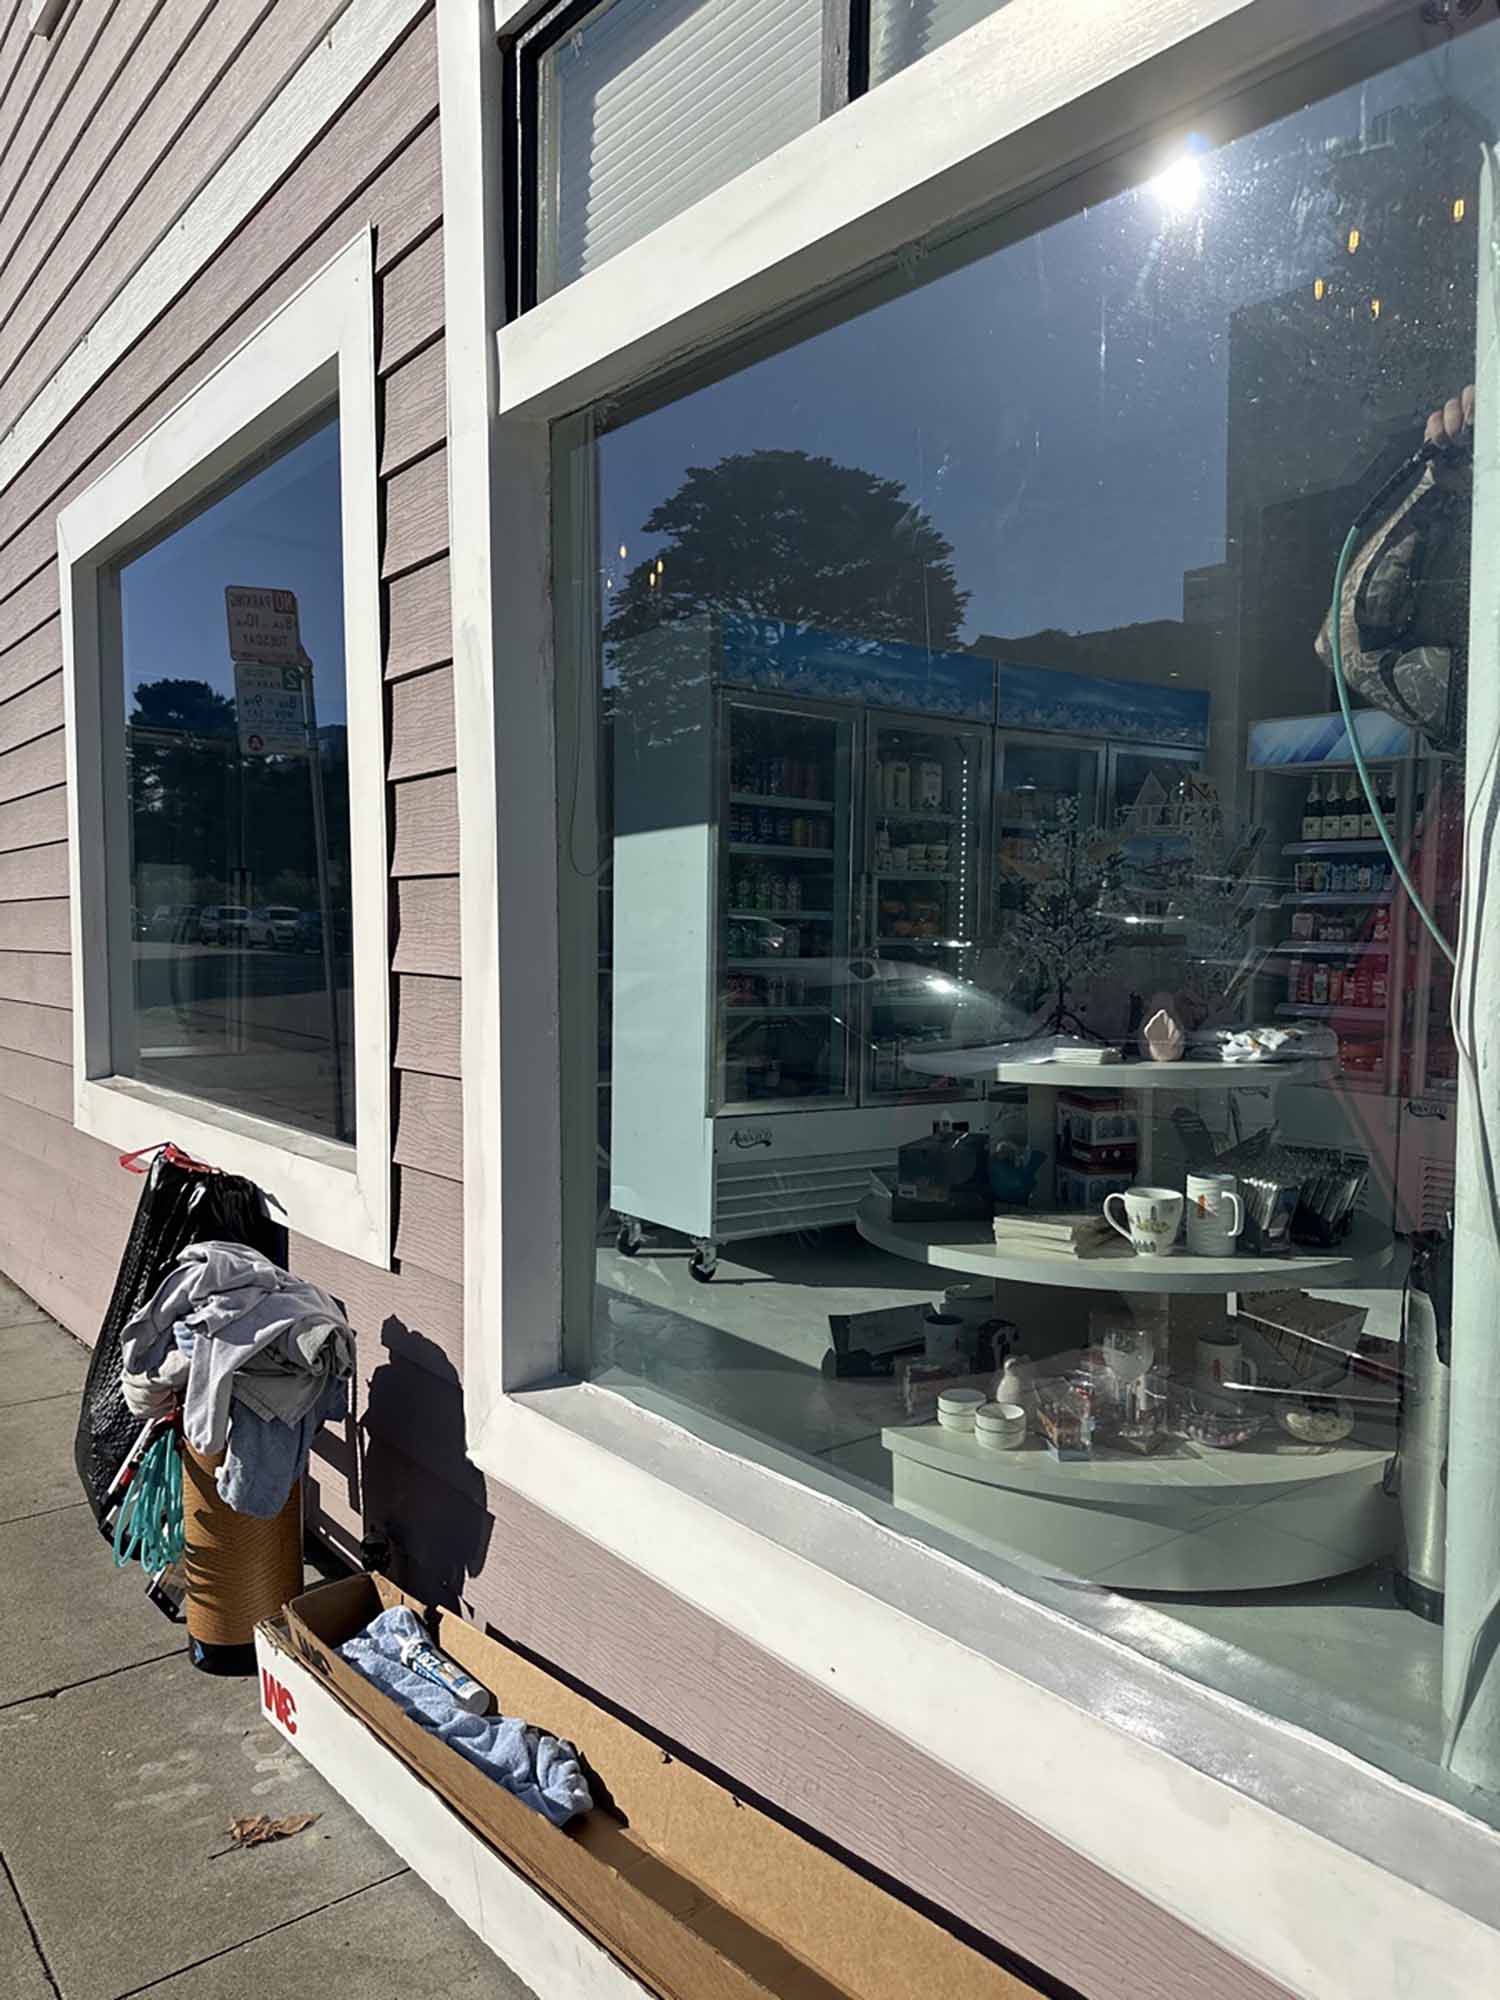 ClimatePro Adds Window Film to a Small Business in San Francisco